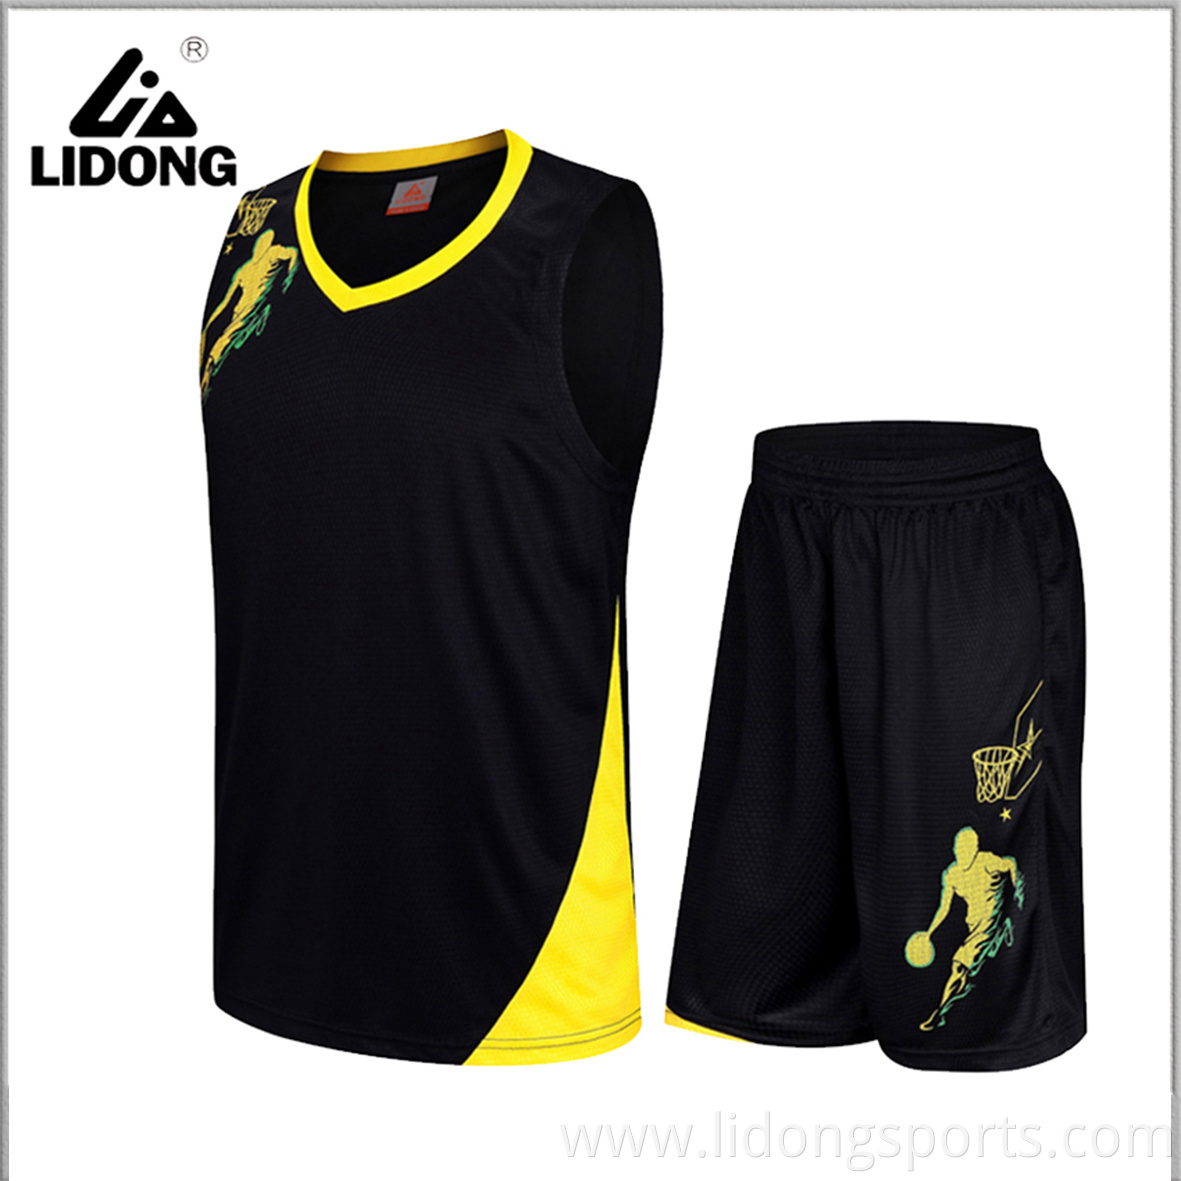 New unisex custom made wholesale kids and adult basketball uniforms